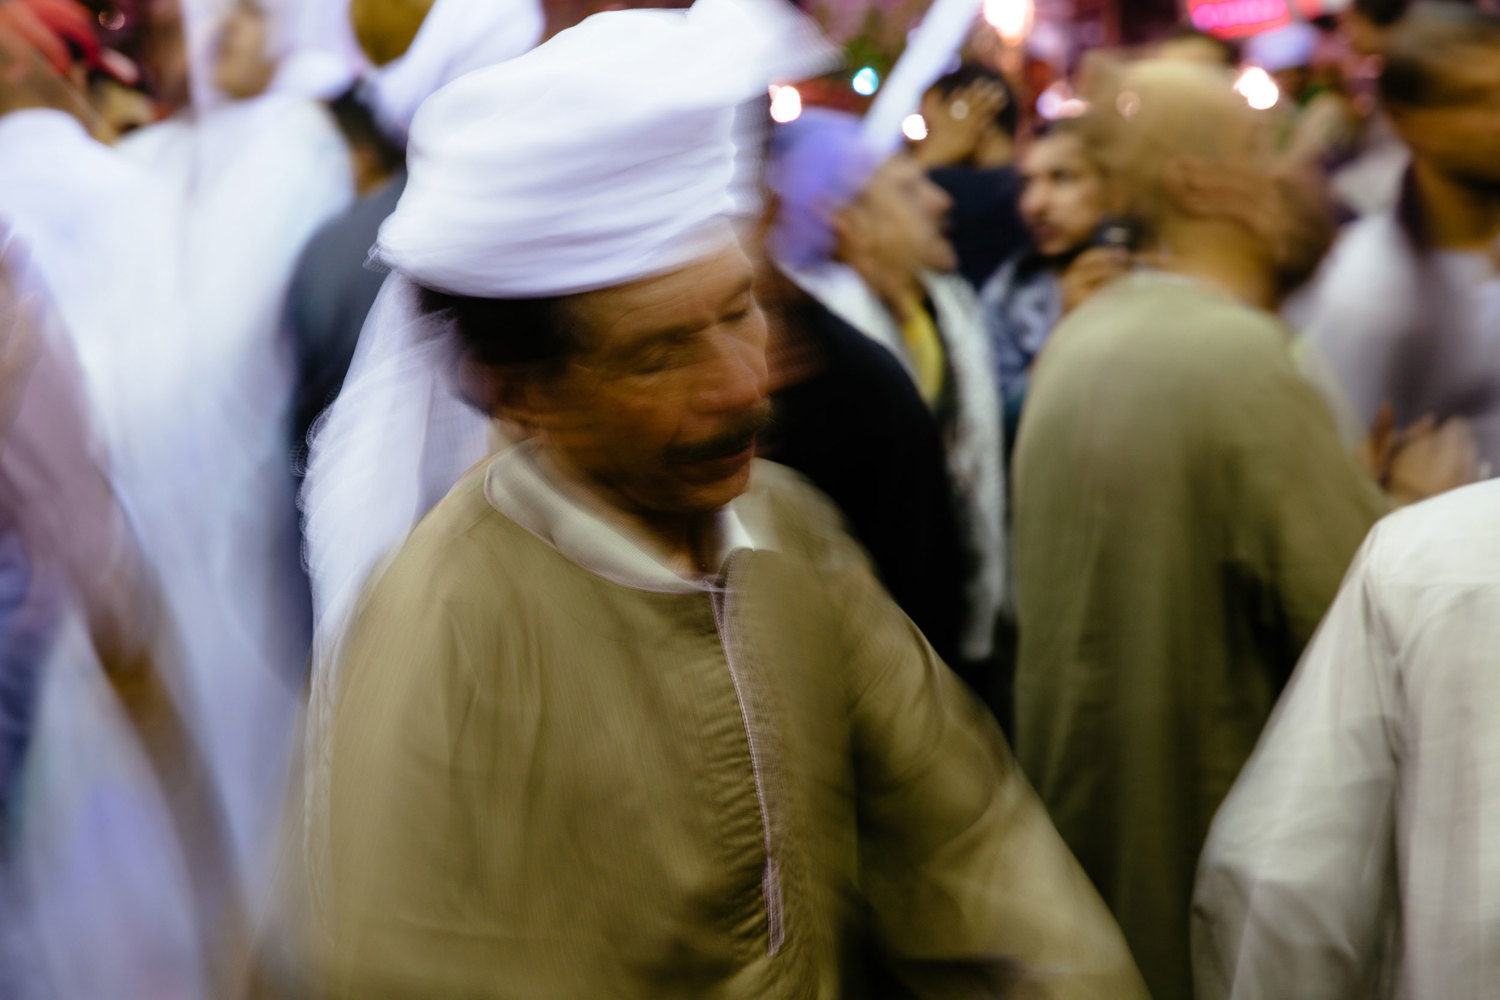  A man sways in a trance to traditional moulid music. Followers of the more spiritual Sufi sect are frequent guests of the festival. They are known to dance and sing for hours into the night. 